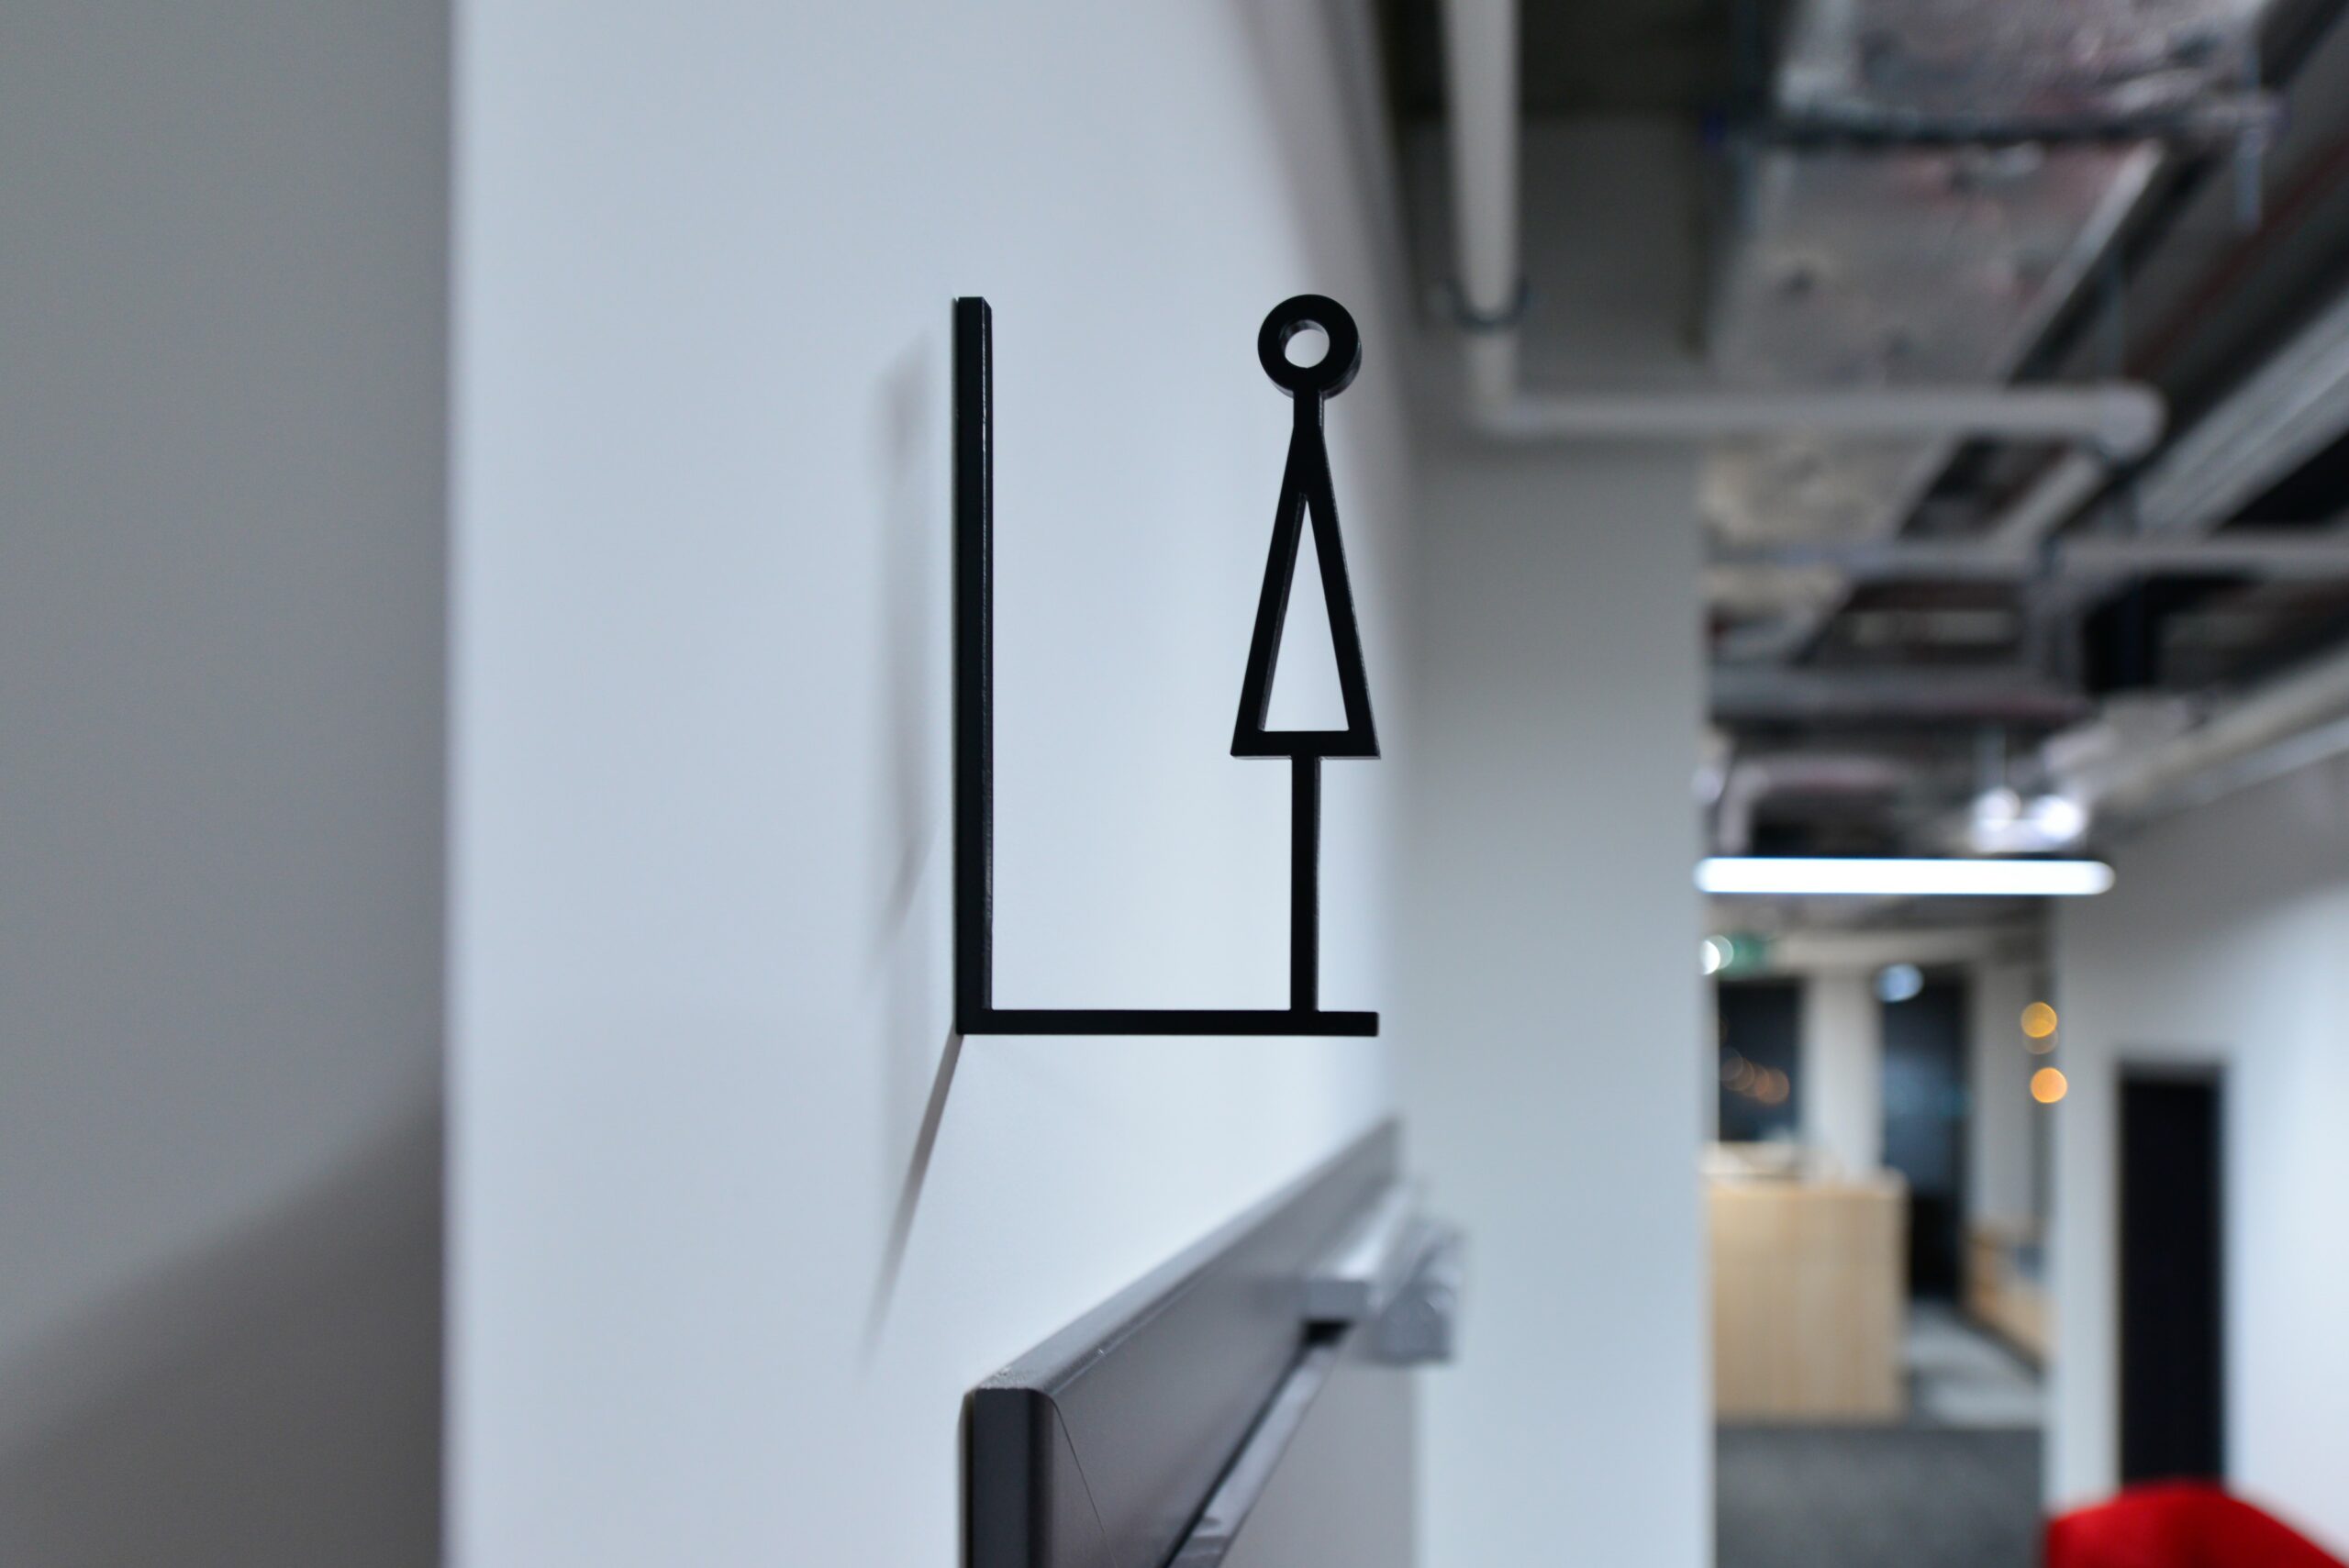 McCormick-by-Space-Wizard-wayfinding-signage-72-scaled